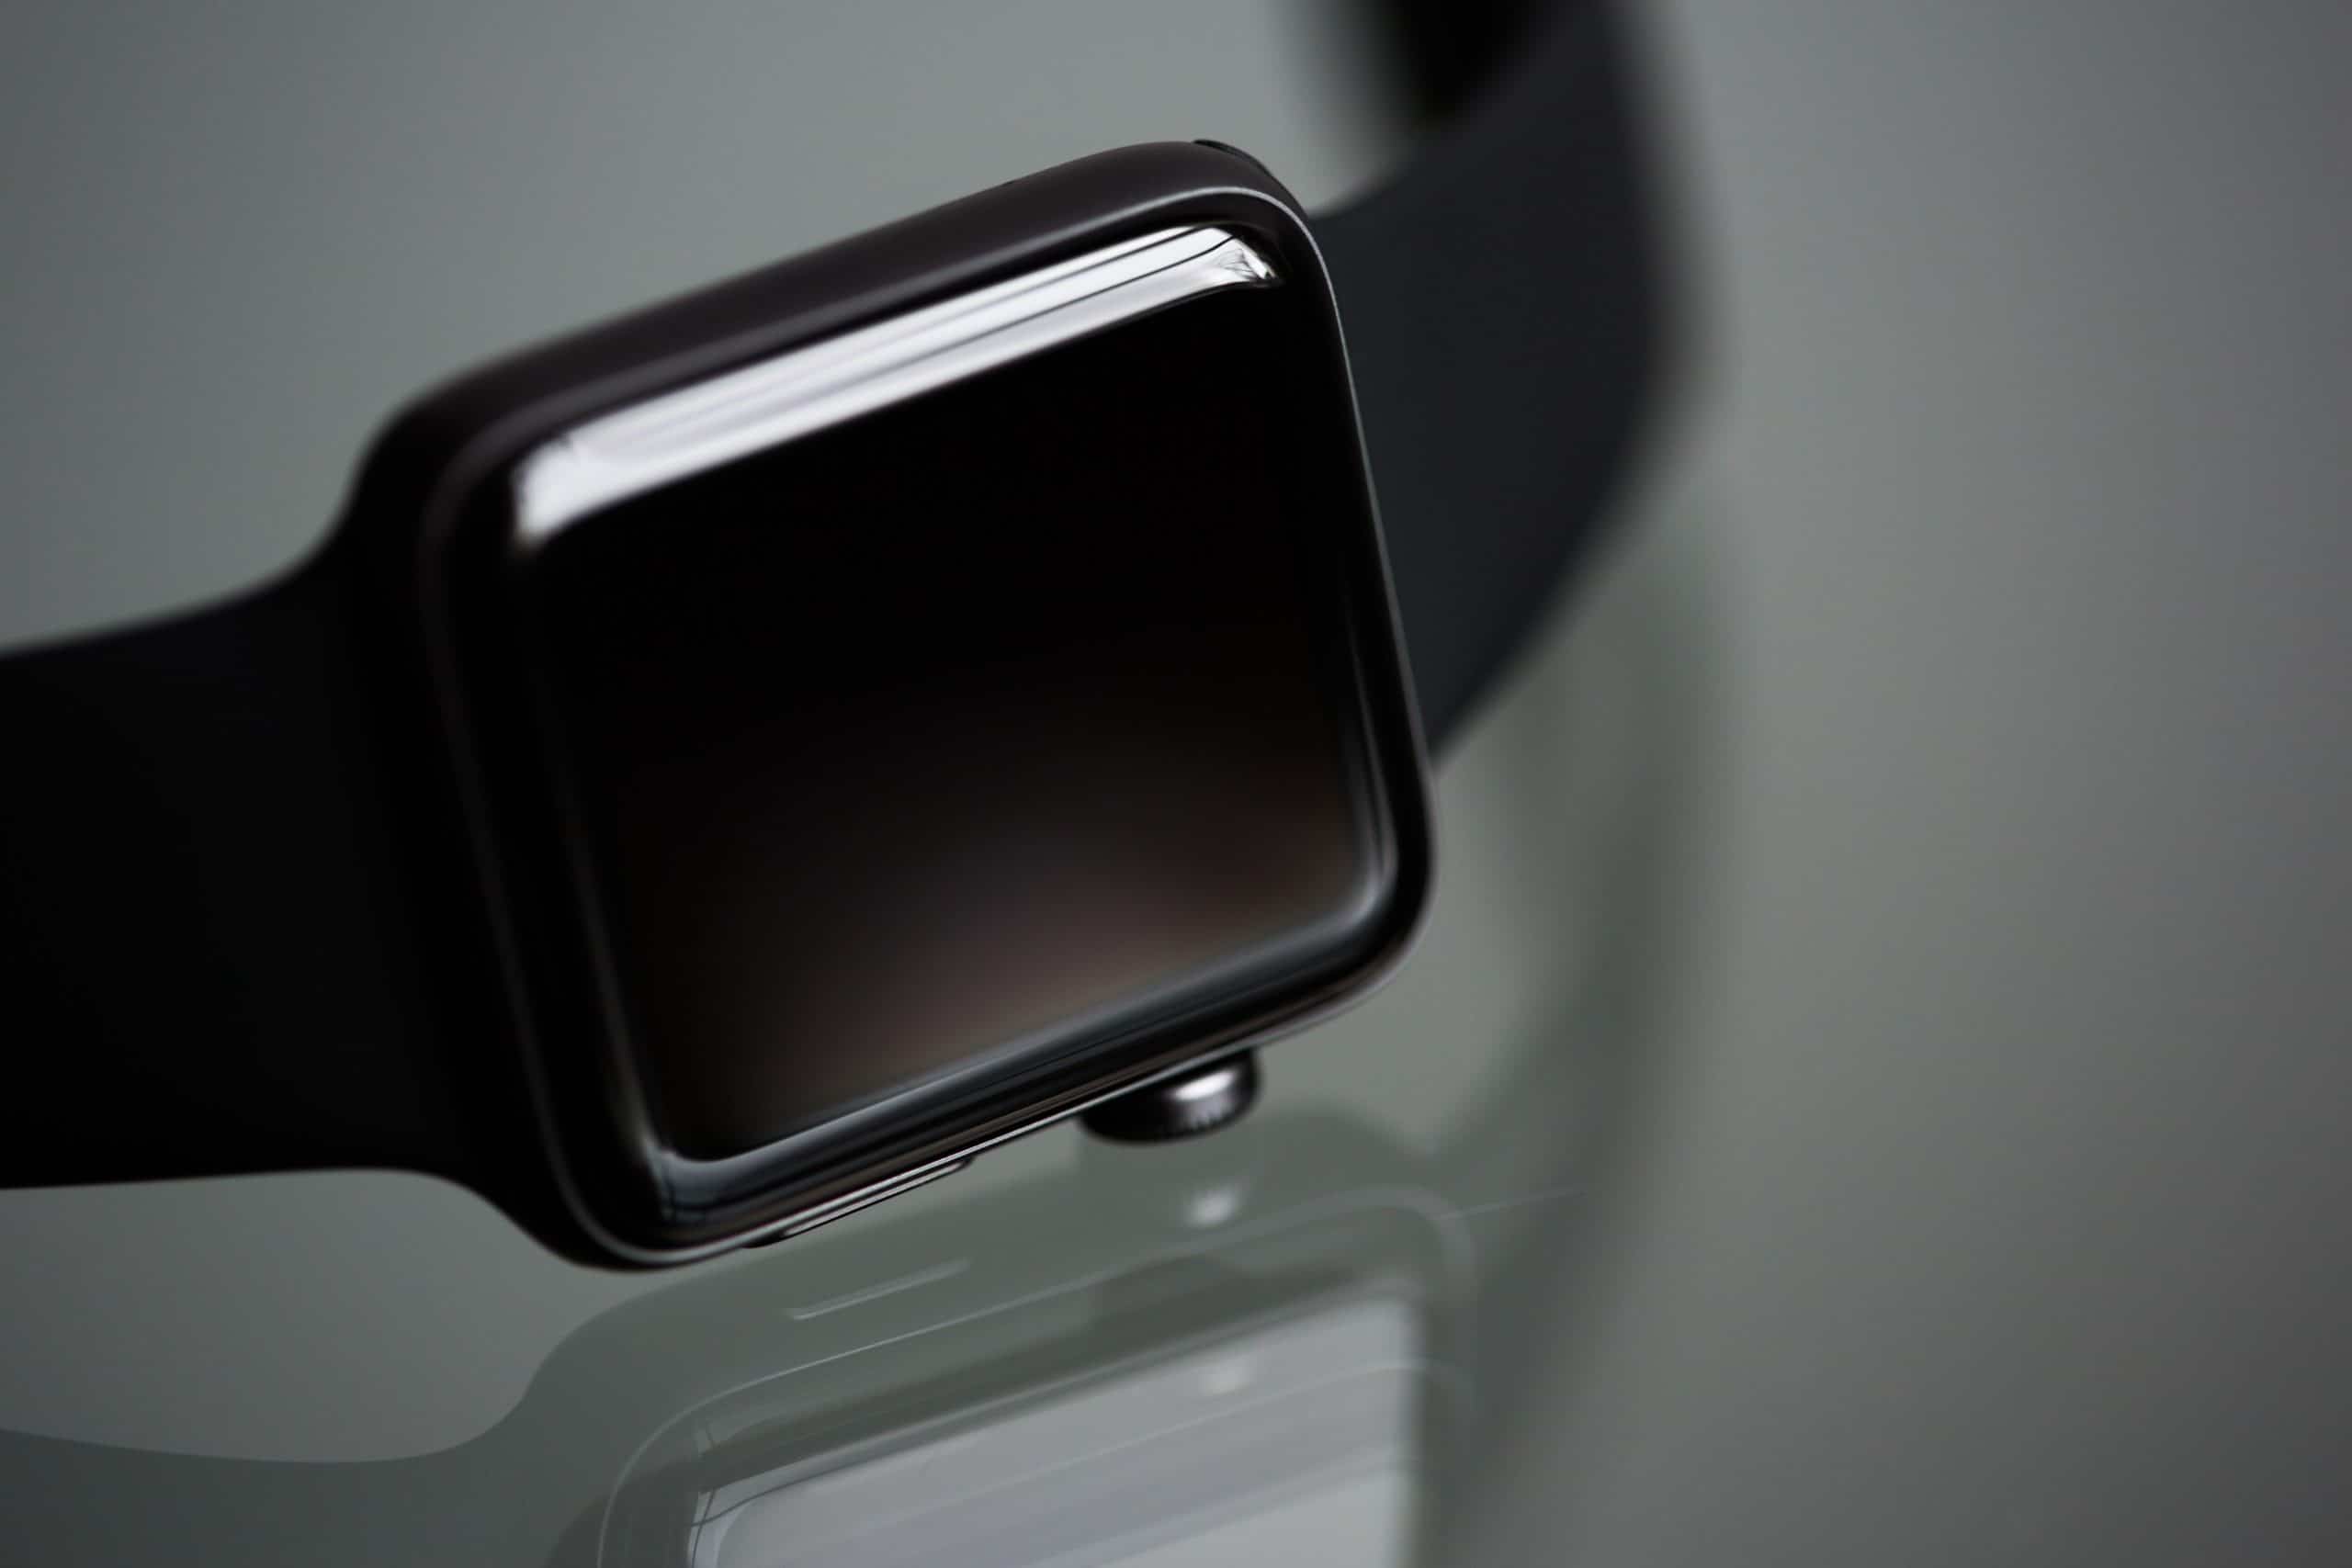 What Happens If You Buy a Stolen Apple Watch